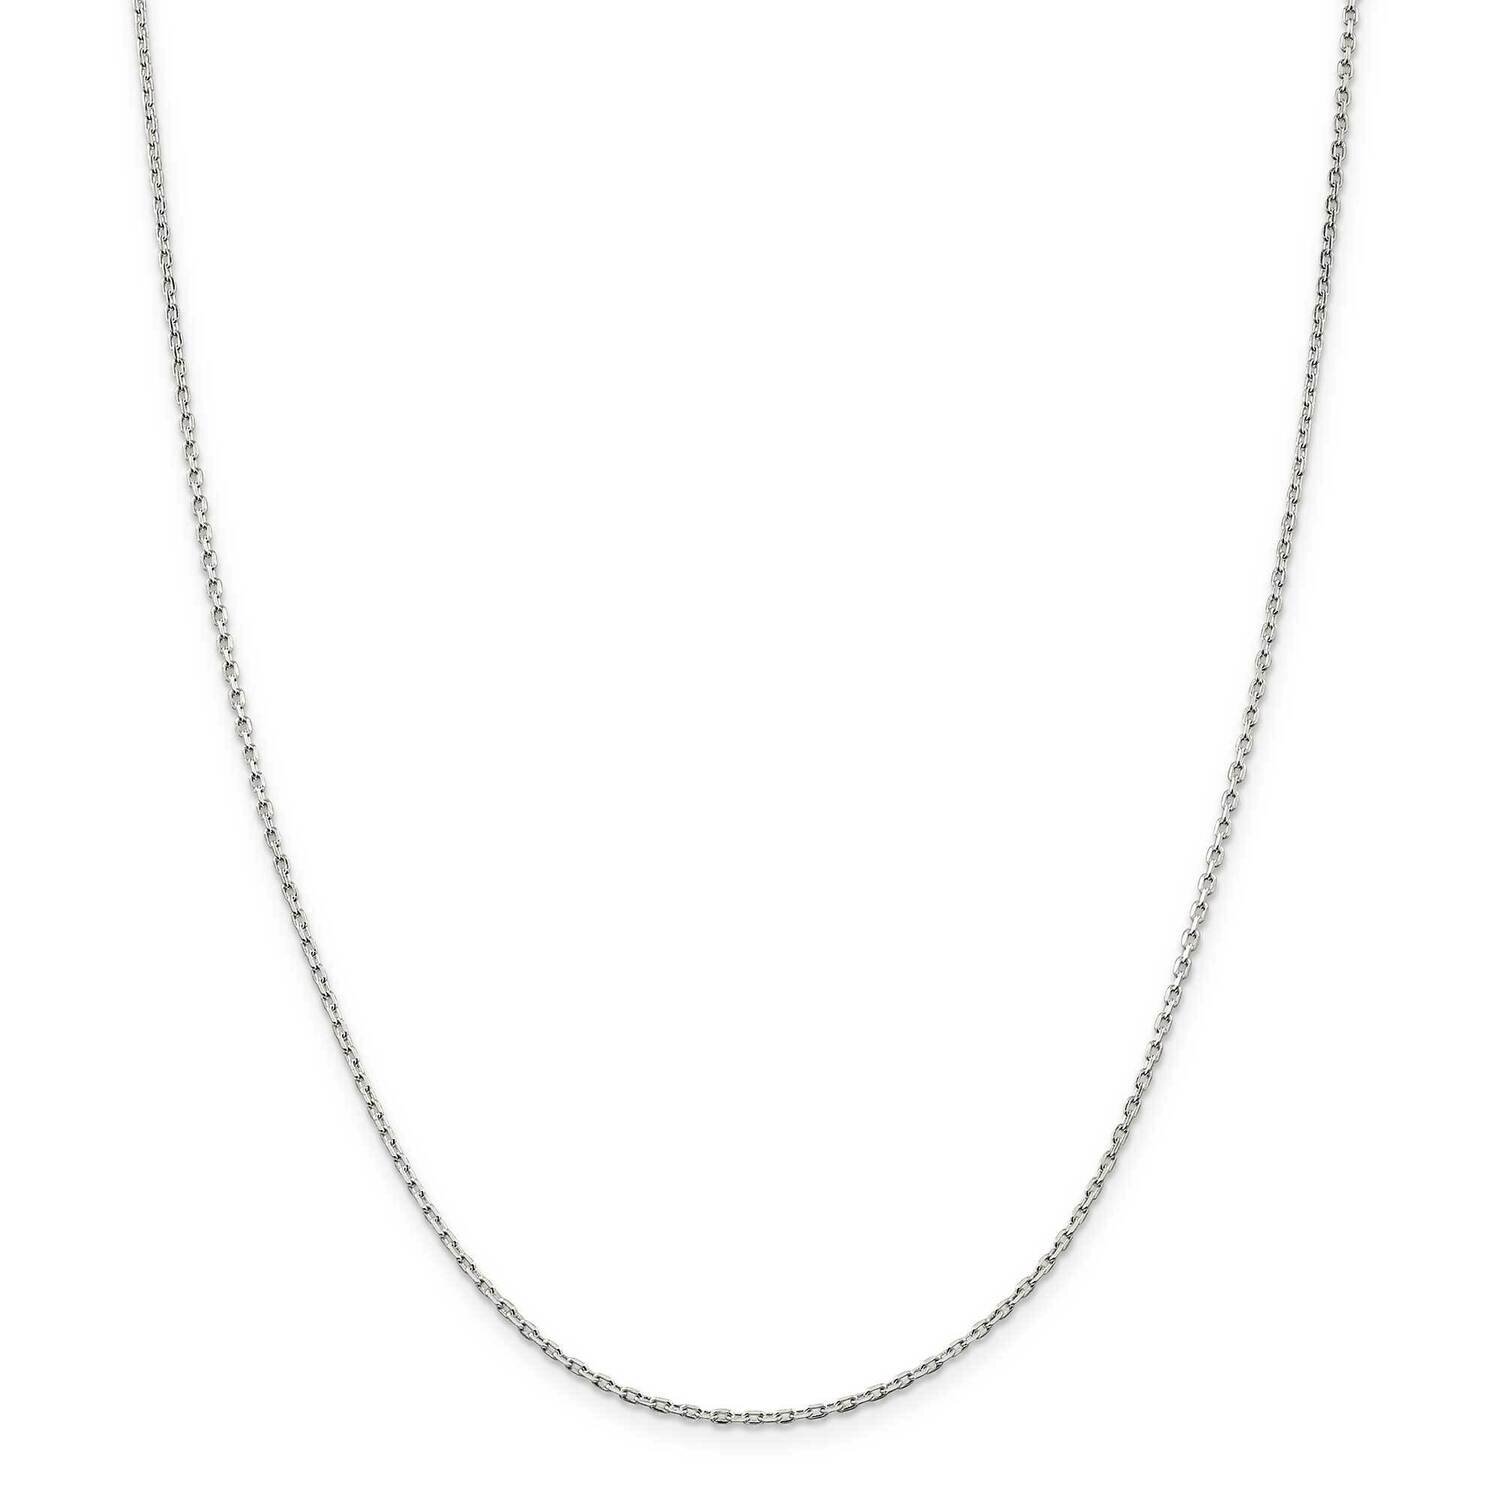 1.5mm Beveled Oval Cable Chain 14 Inch Sterling Silver QCA050-14